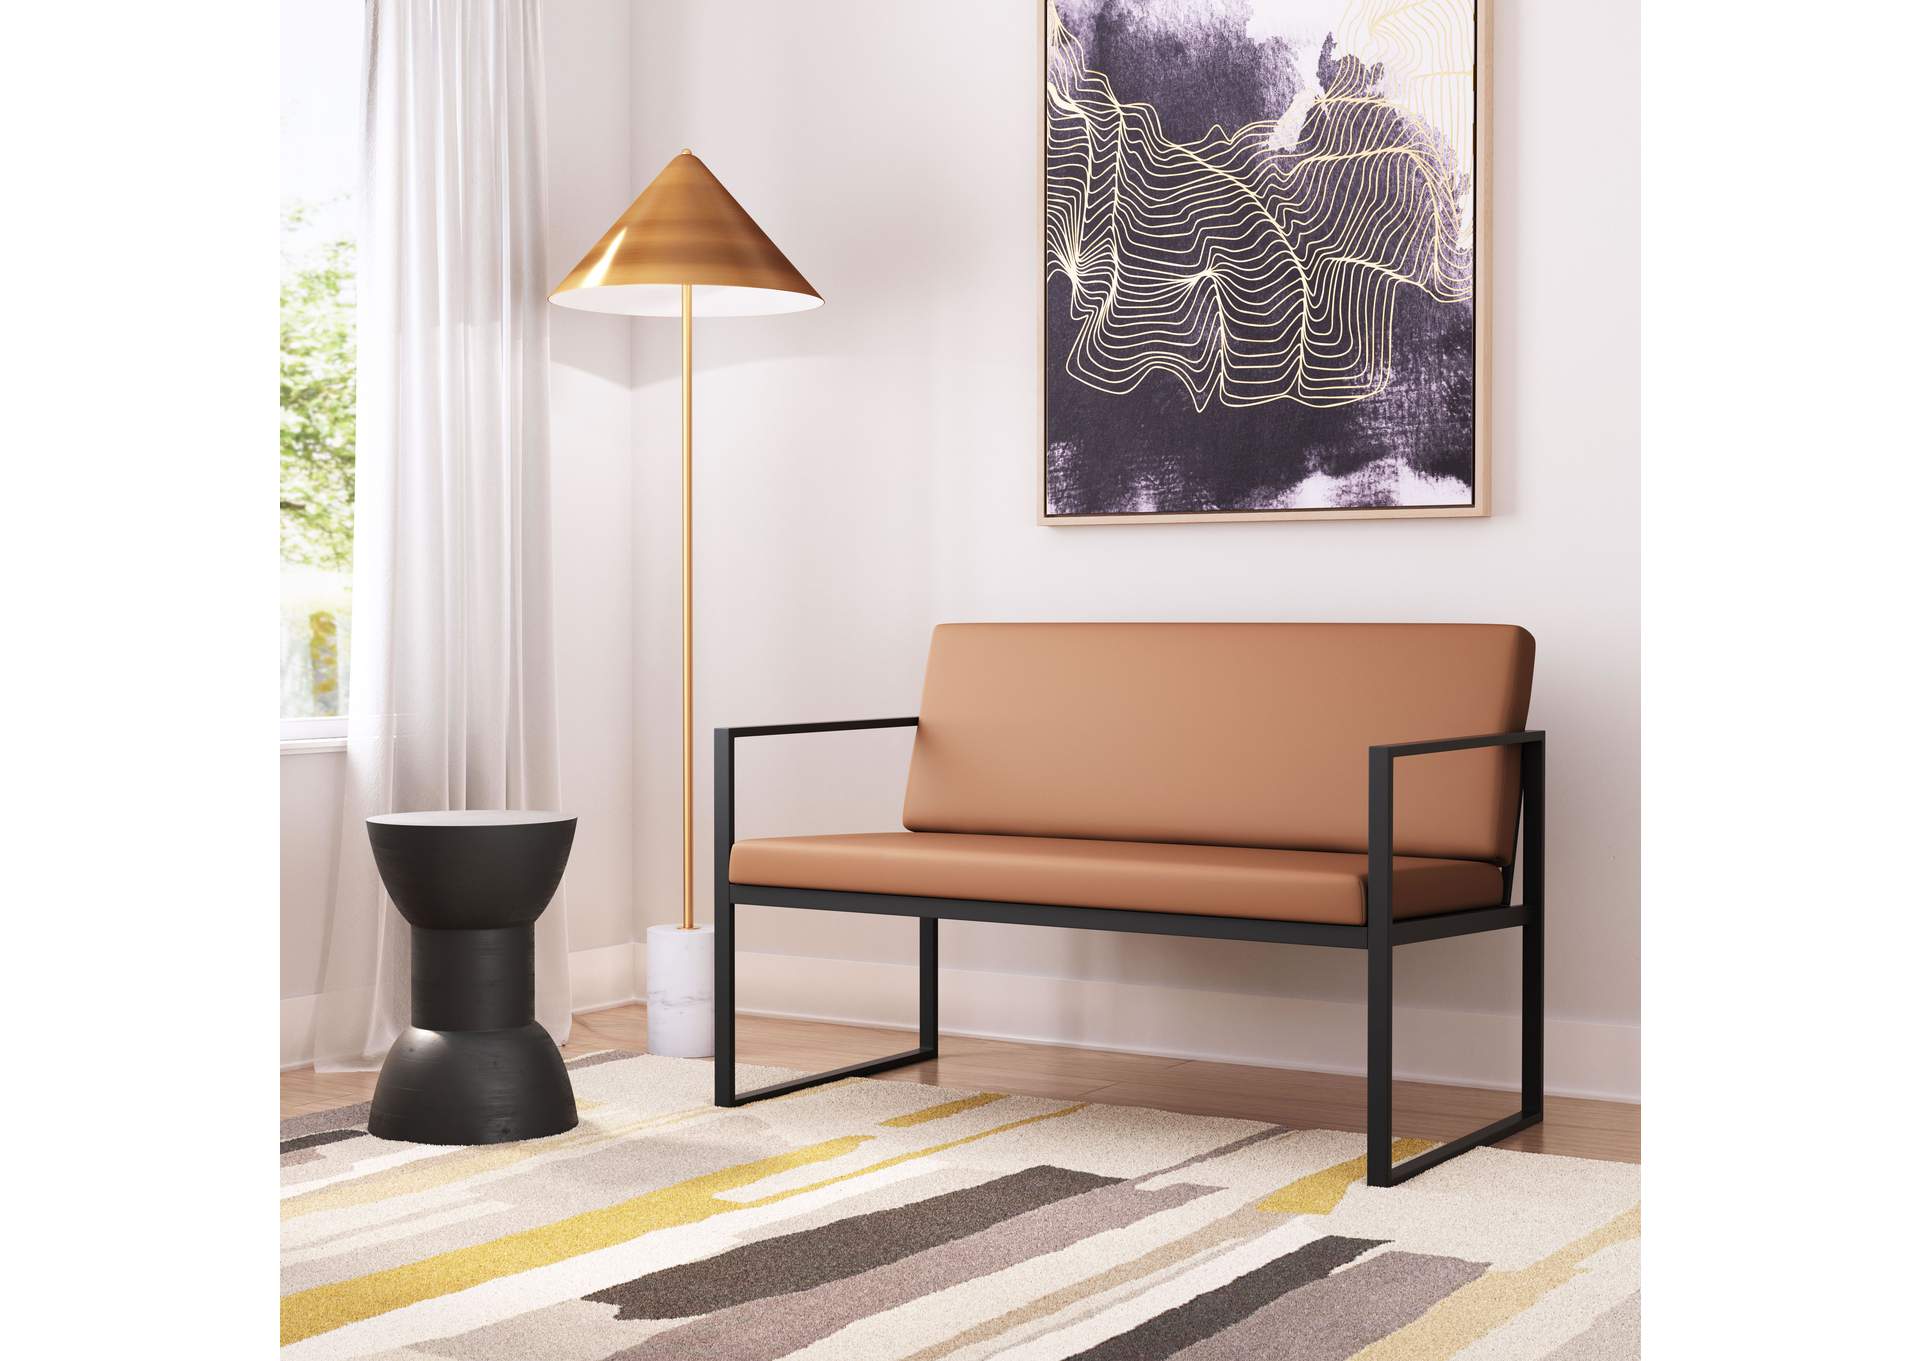 Claremont Sofa Brown,Zuo